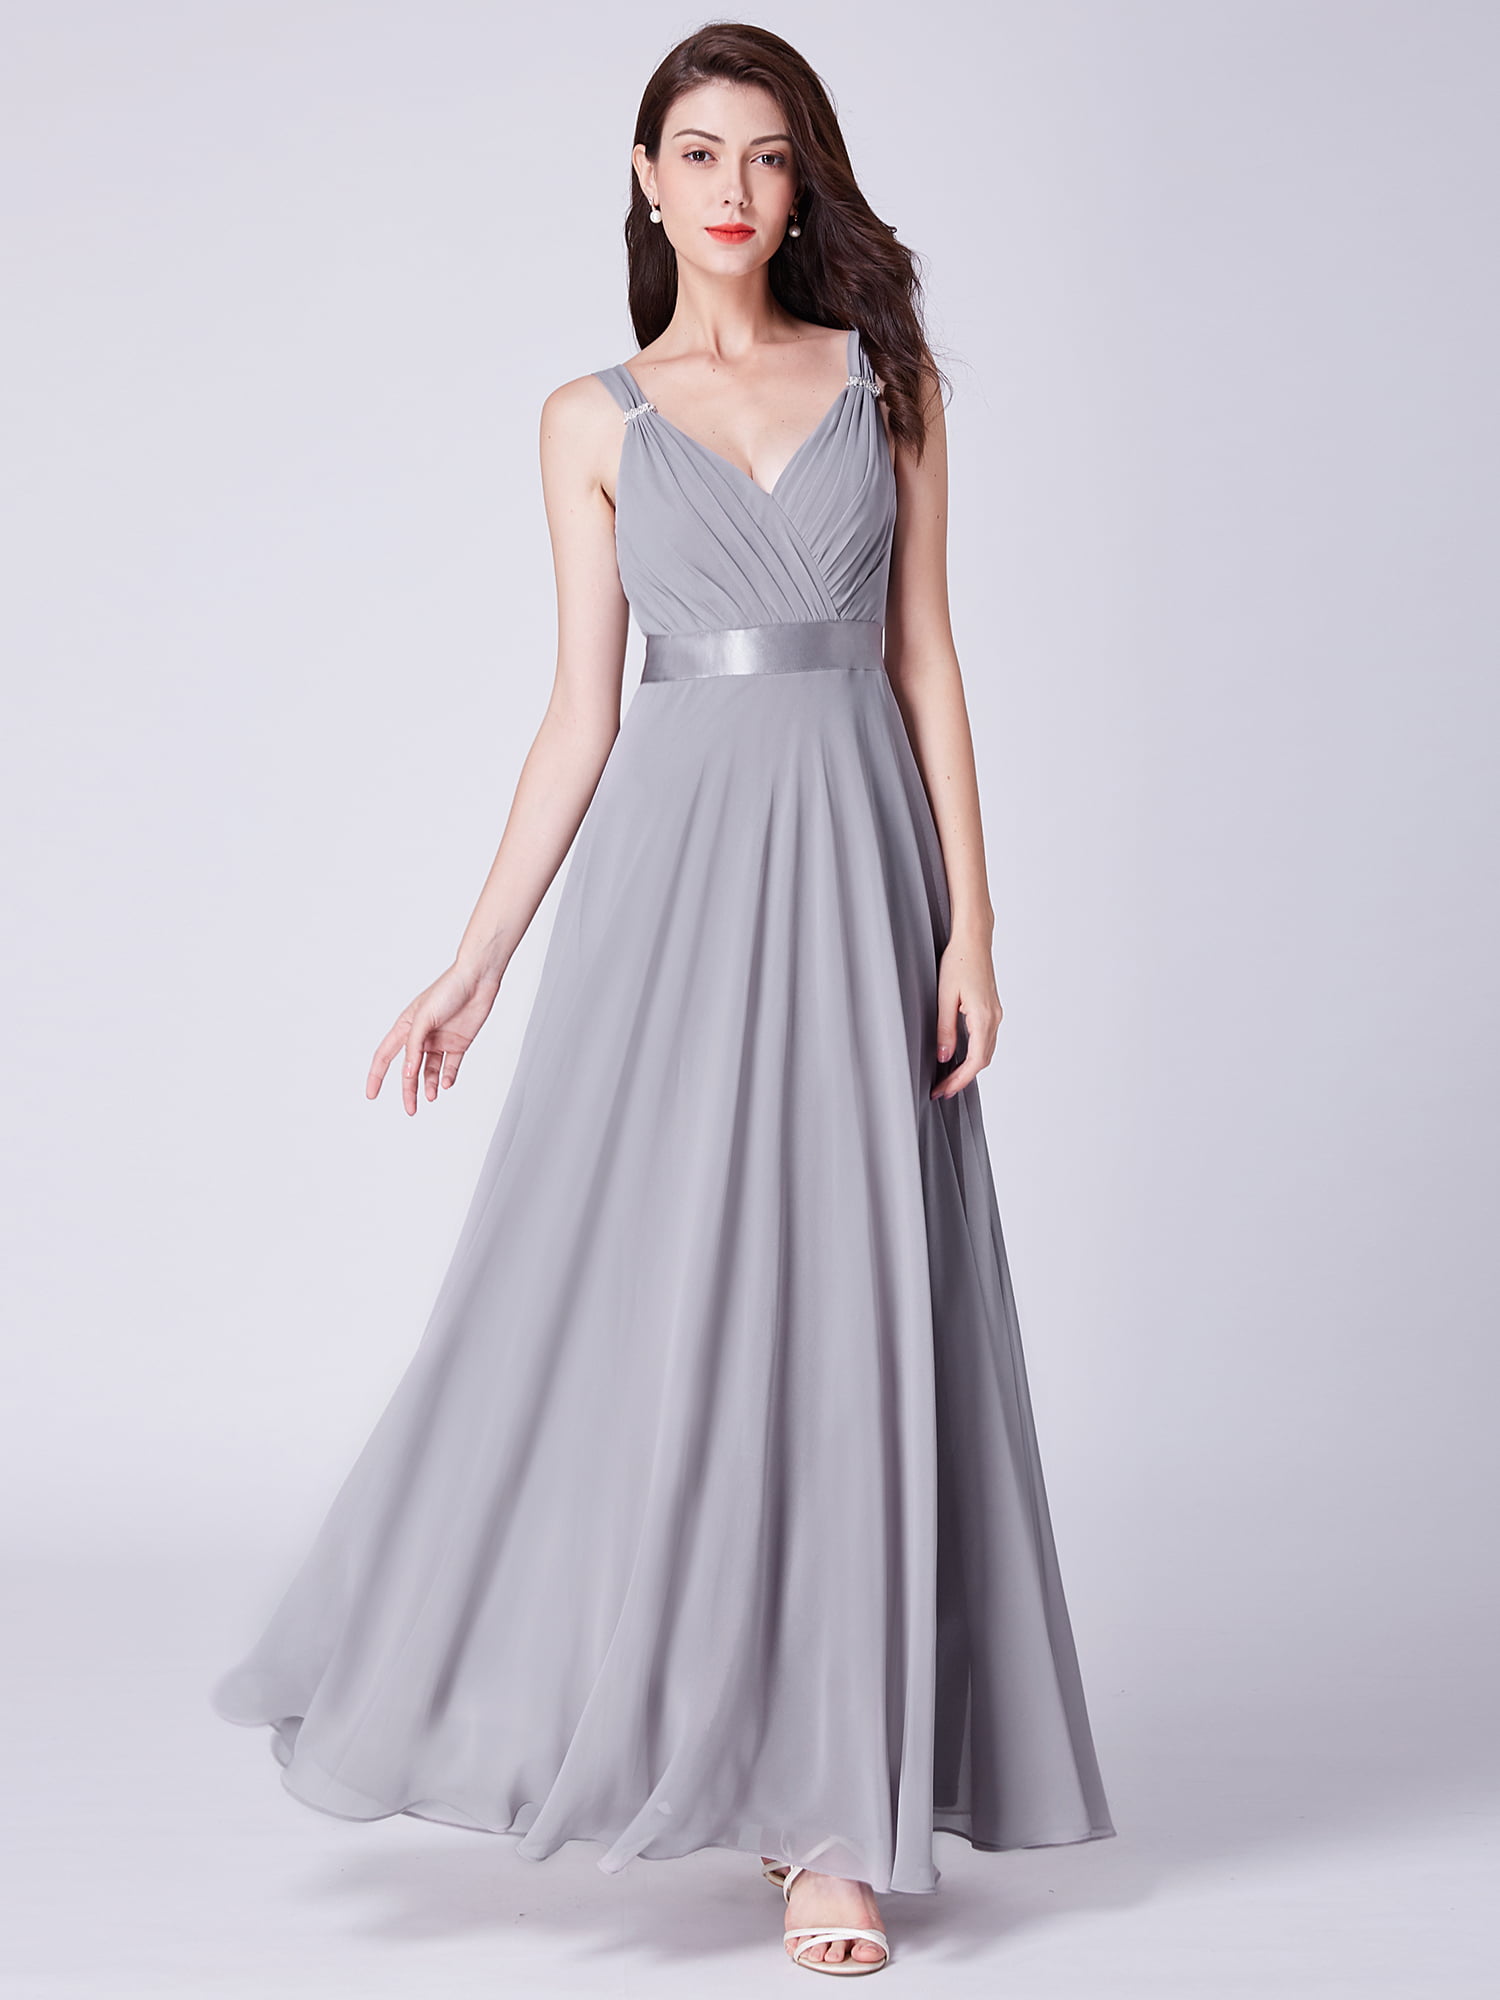 Ever-Pretty Elegant A Line Long Tulle Bridesmaid Dresses with Sequin Bodice 07392 